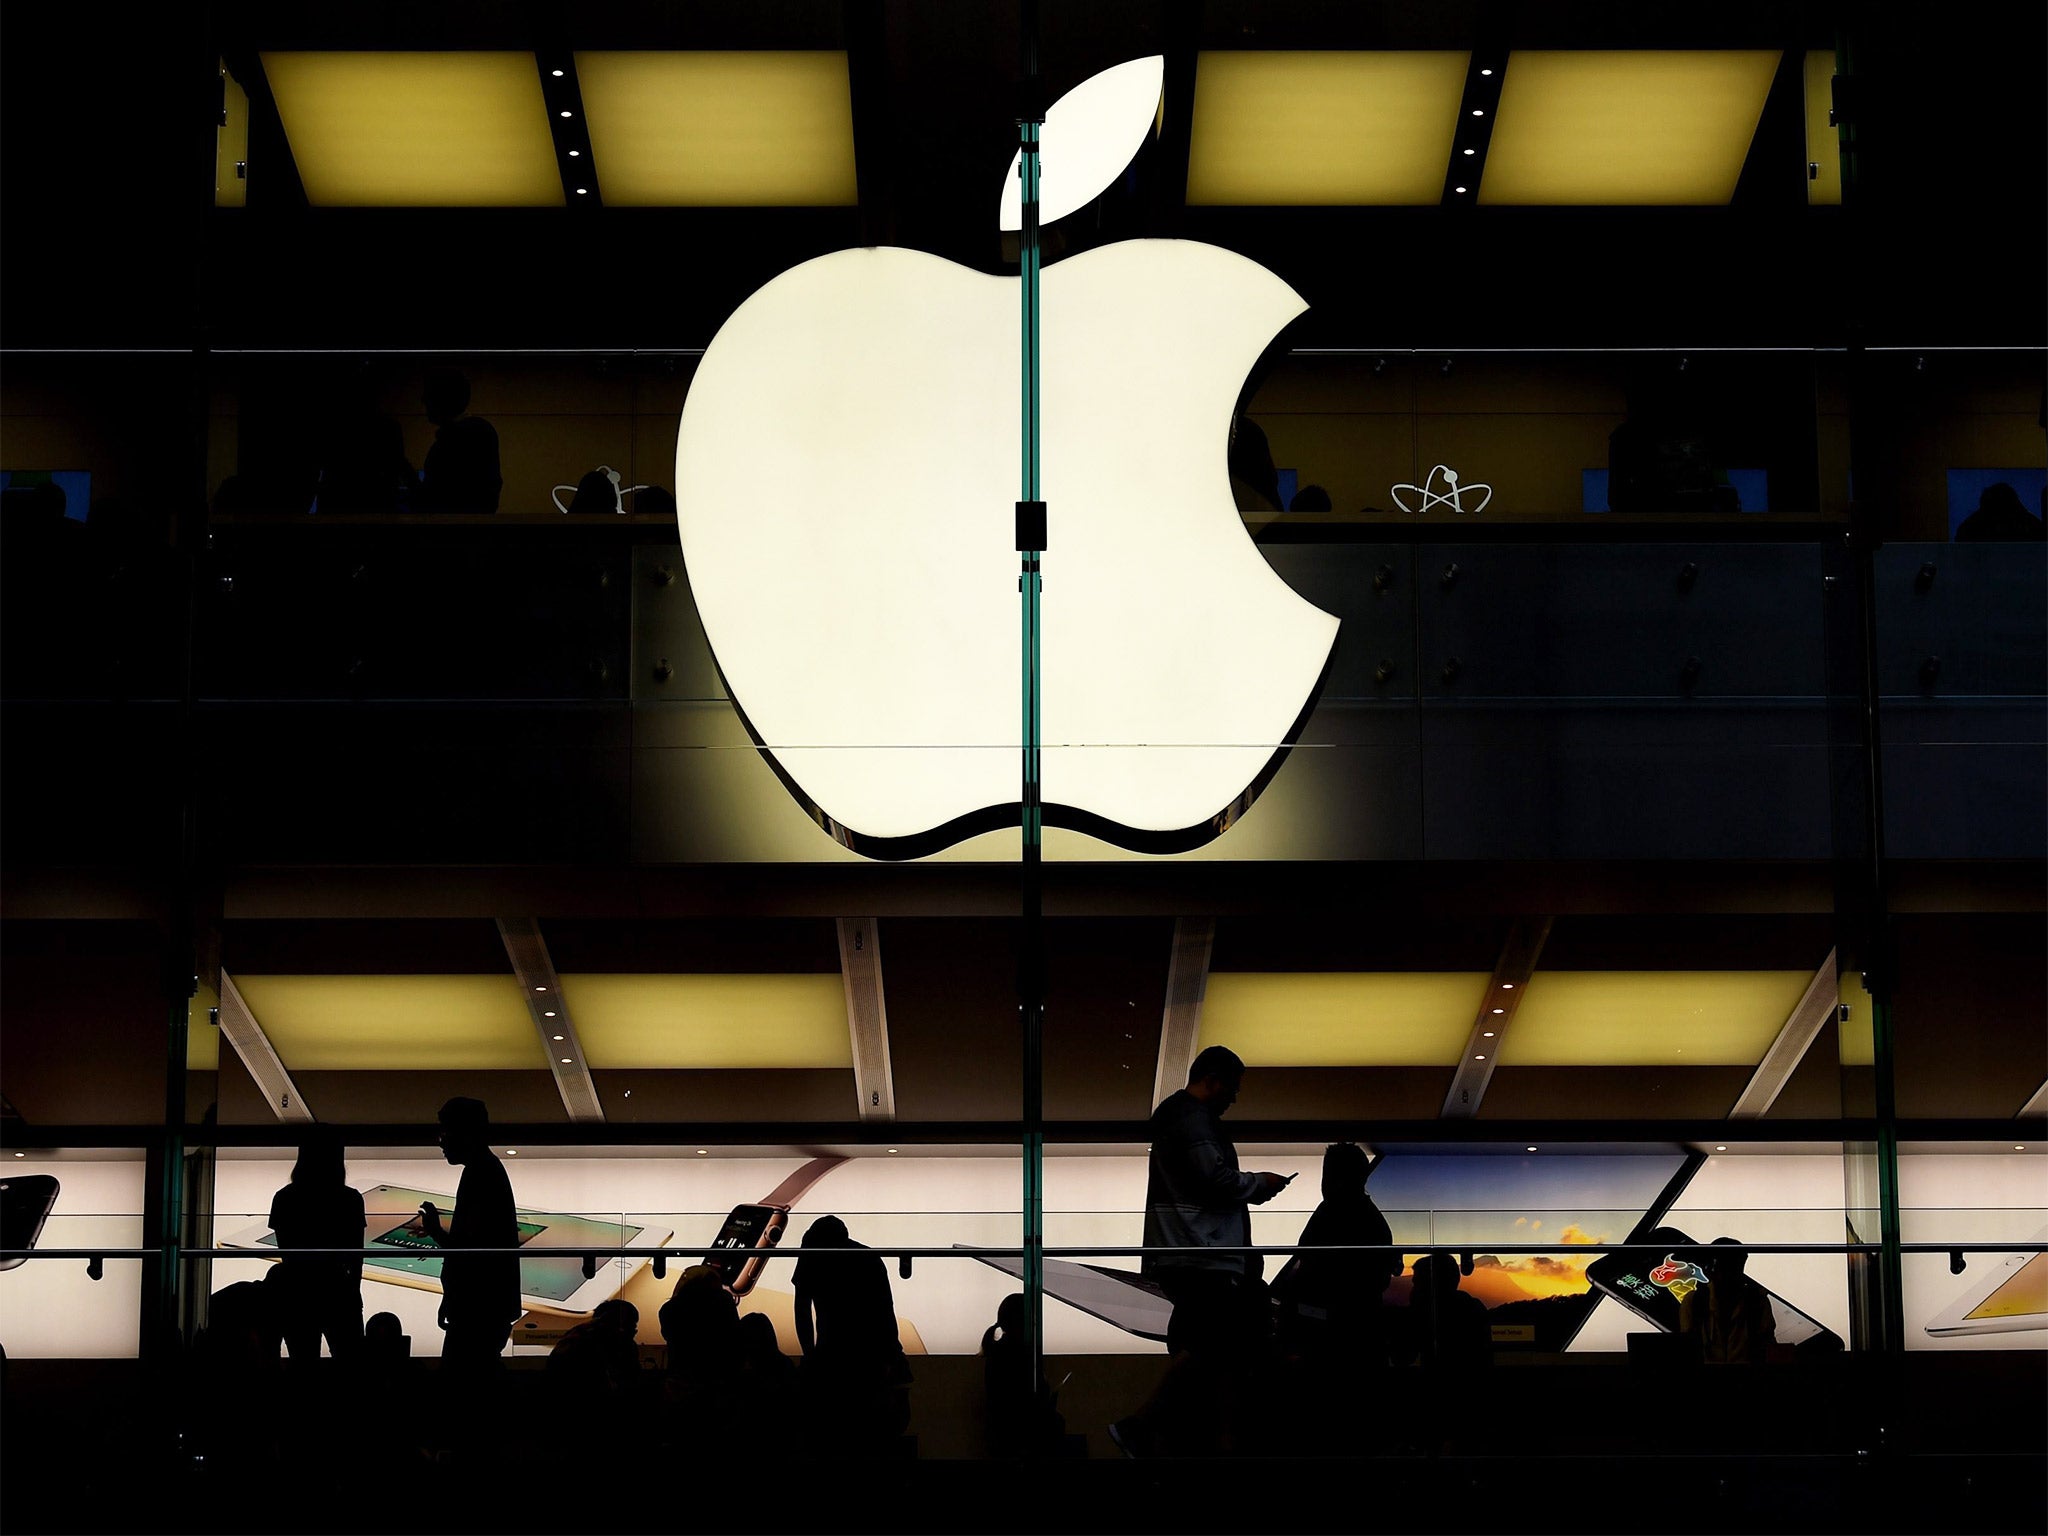 Falling currencies are reducing the numbers of people who can afford to buy Apple products